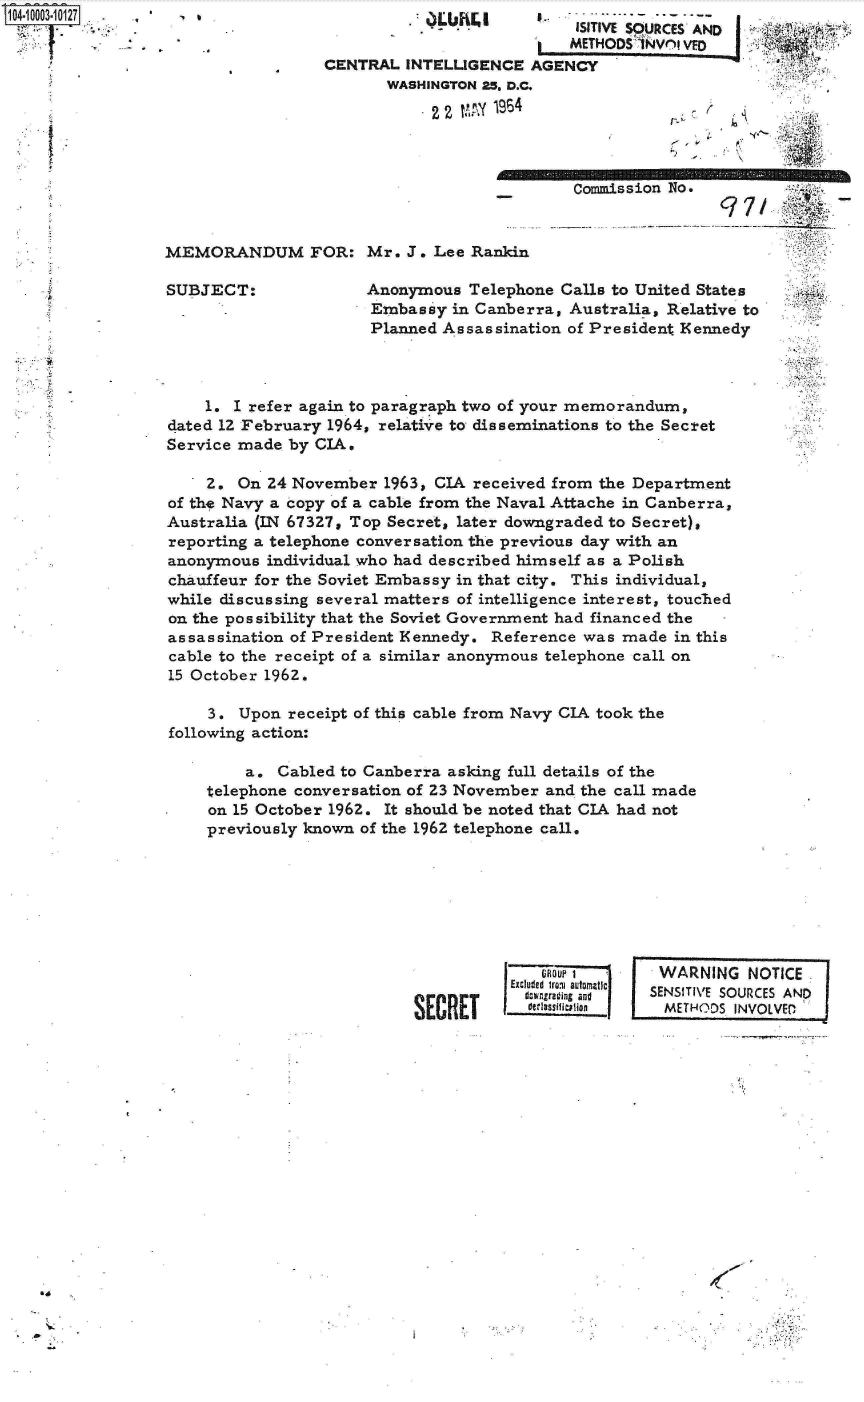 handle is hein.jfk/jfkarch07383 and id is 1 raw text is: 104-10003-10127   :


                            ISITIVE SOURCES AND
                            METHODS 1NV(1 I VED
CENTRAL  INTELLIGENCE  AGENCY
       WASHINGTON 25. D.C.

            22 WW  1964


r.


Commiss


MEMORANDUM FOR: Mr. J. Lee Rankin


SUBJECT:


ion No.


Anonymous  Telephone CaUs  to United States
Embassy  in Canberra, Australia, Relative to
Planned Assassination of President Kennedy


    1. I refer again to paragraph two of your memorandum,
dated 12 February 1964, relative to disserninations to the Secret
Service made by CIA.

    2.  On 24 November  1963, CIA received from the Department
of the Navy a copy of a cable from the Naval Attache in Canberra,
Australia (IN 67327, Top Secret, later downgraded to Secret),
reporting a telephone conversation the previous day with an
anonymous  individual who had described himself as a Polish
chauffeur for the Soviet Embassy in that city. This individual,
while discussing several matters of intelligence interest, touched
on the possibility that the Soviet Government had financed the -
assassination of President Kennedy. Reference was made  in this
cable to the receipt of a similar anonymous telephone call on
15 October 1962.

     3. Upon receipt of this cable from Navy CIA took the
following action:

         a. Cabled to Canberra asking full details of the
    telephone conversation of 23 November and the call made
*    on 15 October 1962. It should be noted that CIA had not
     previously known of the 1962 telephone call.


           Excluded irvi sutomatic

SECRETI      w.r~n


I


WARNING NOTICE
SENSITIVE SOURCES AND
  METHODS INVOLVED


-C


*'a


S


